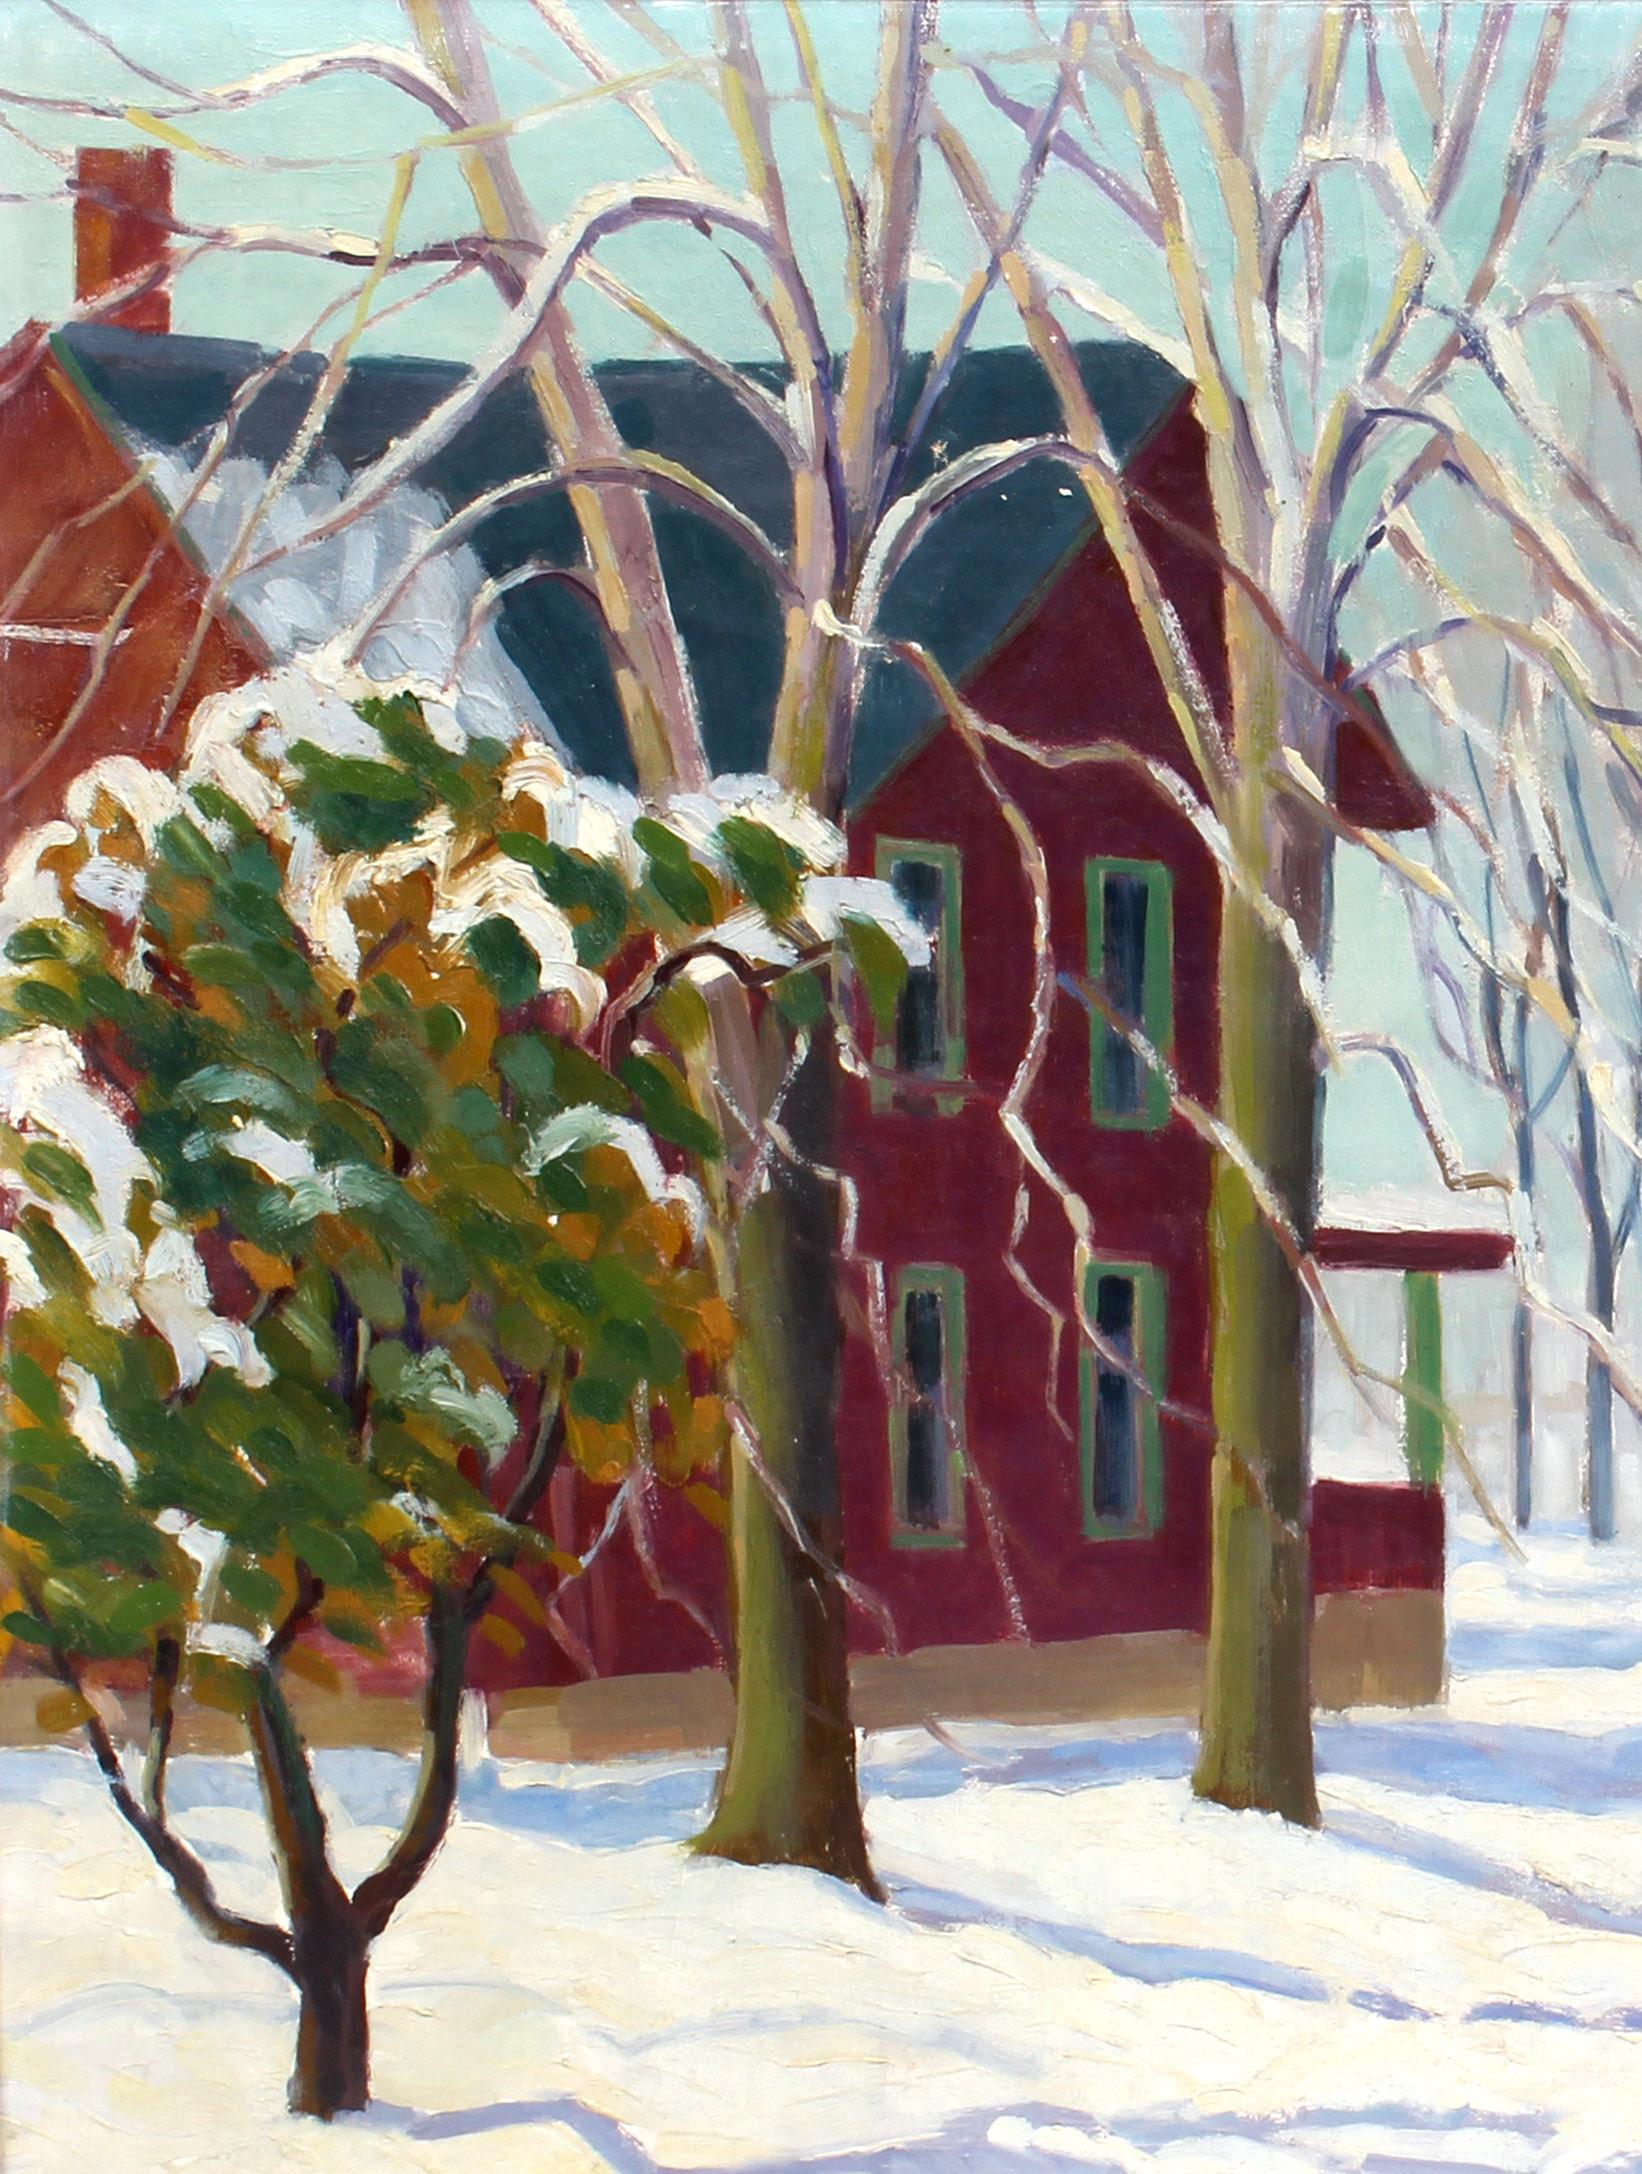 Antique American modernist view of homes in winter signed Timmens.

Oil on board, circa 1935. Signed.  

Displayed in a period modernist frame.  Image, 24